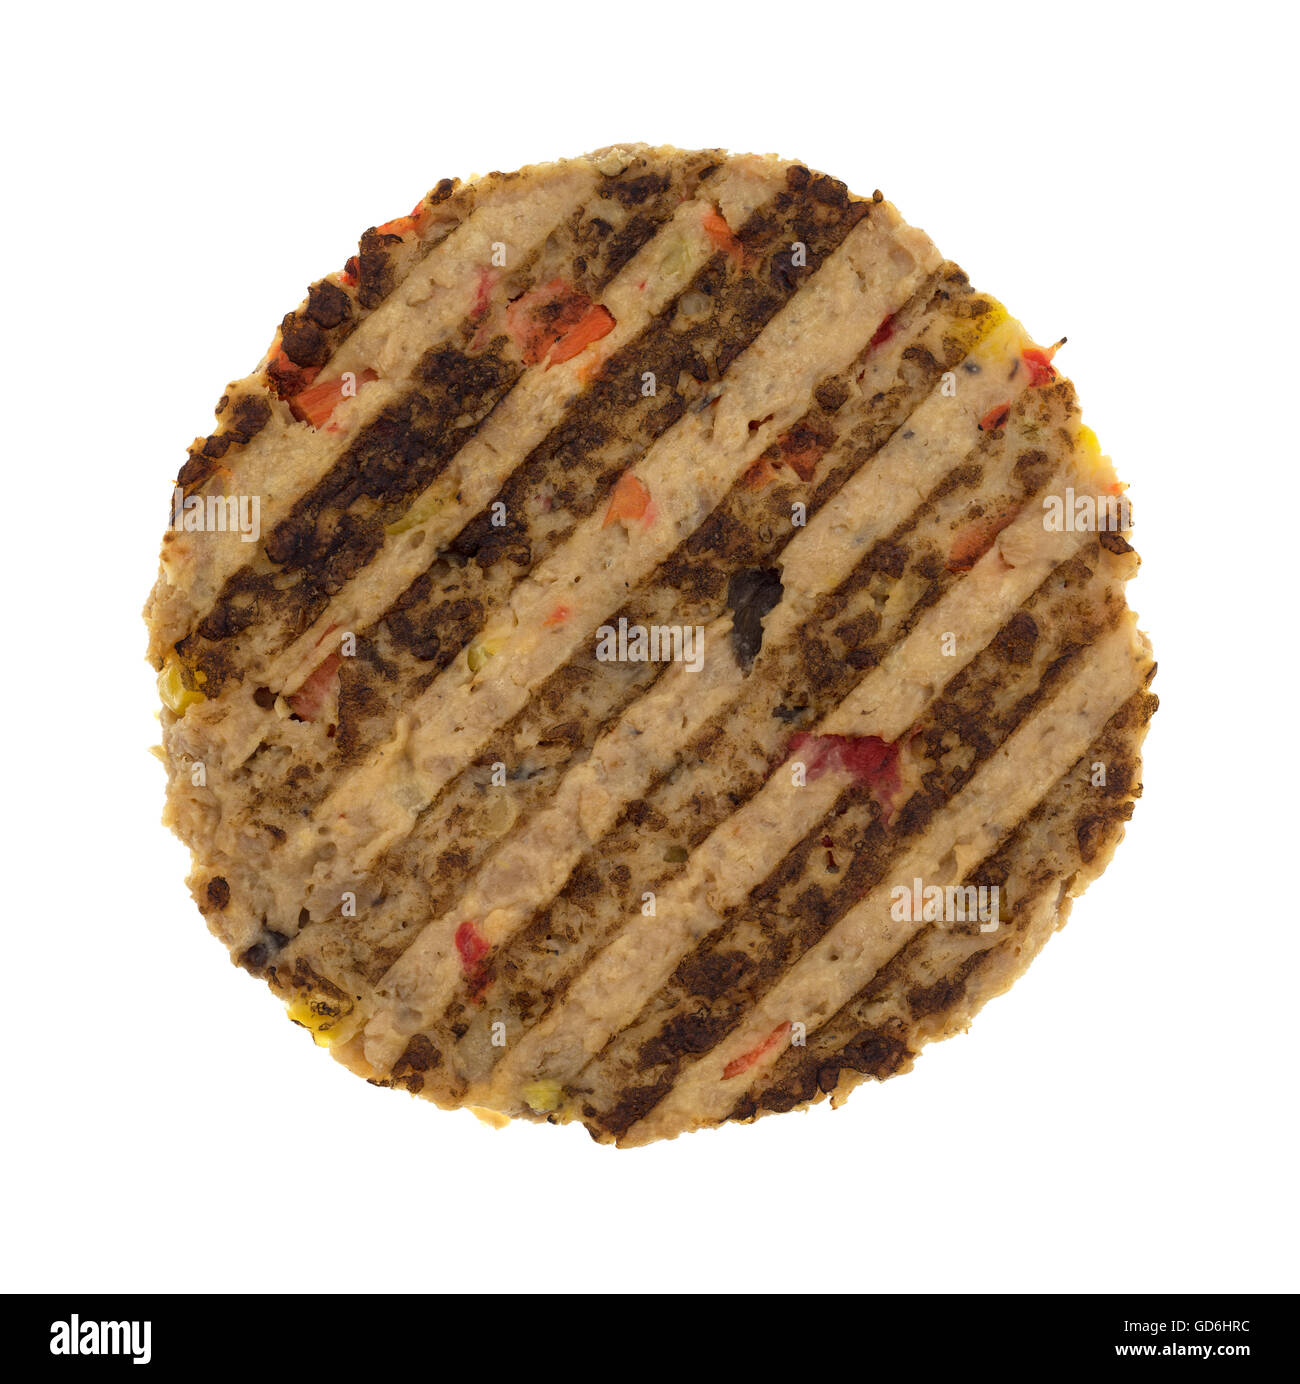 Top view of a veggie burger patty isolated on a white background. Stock Photo